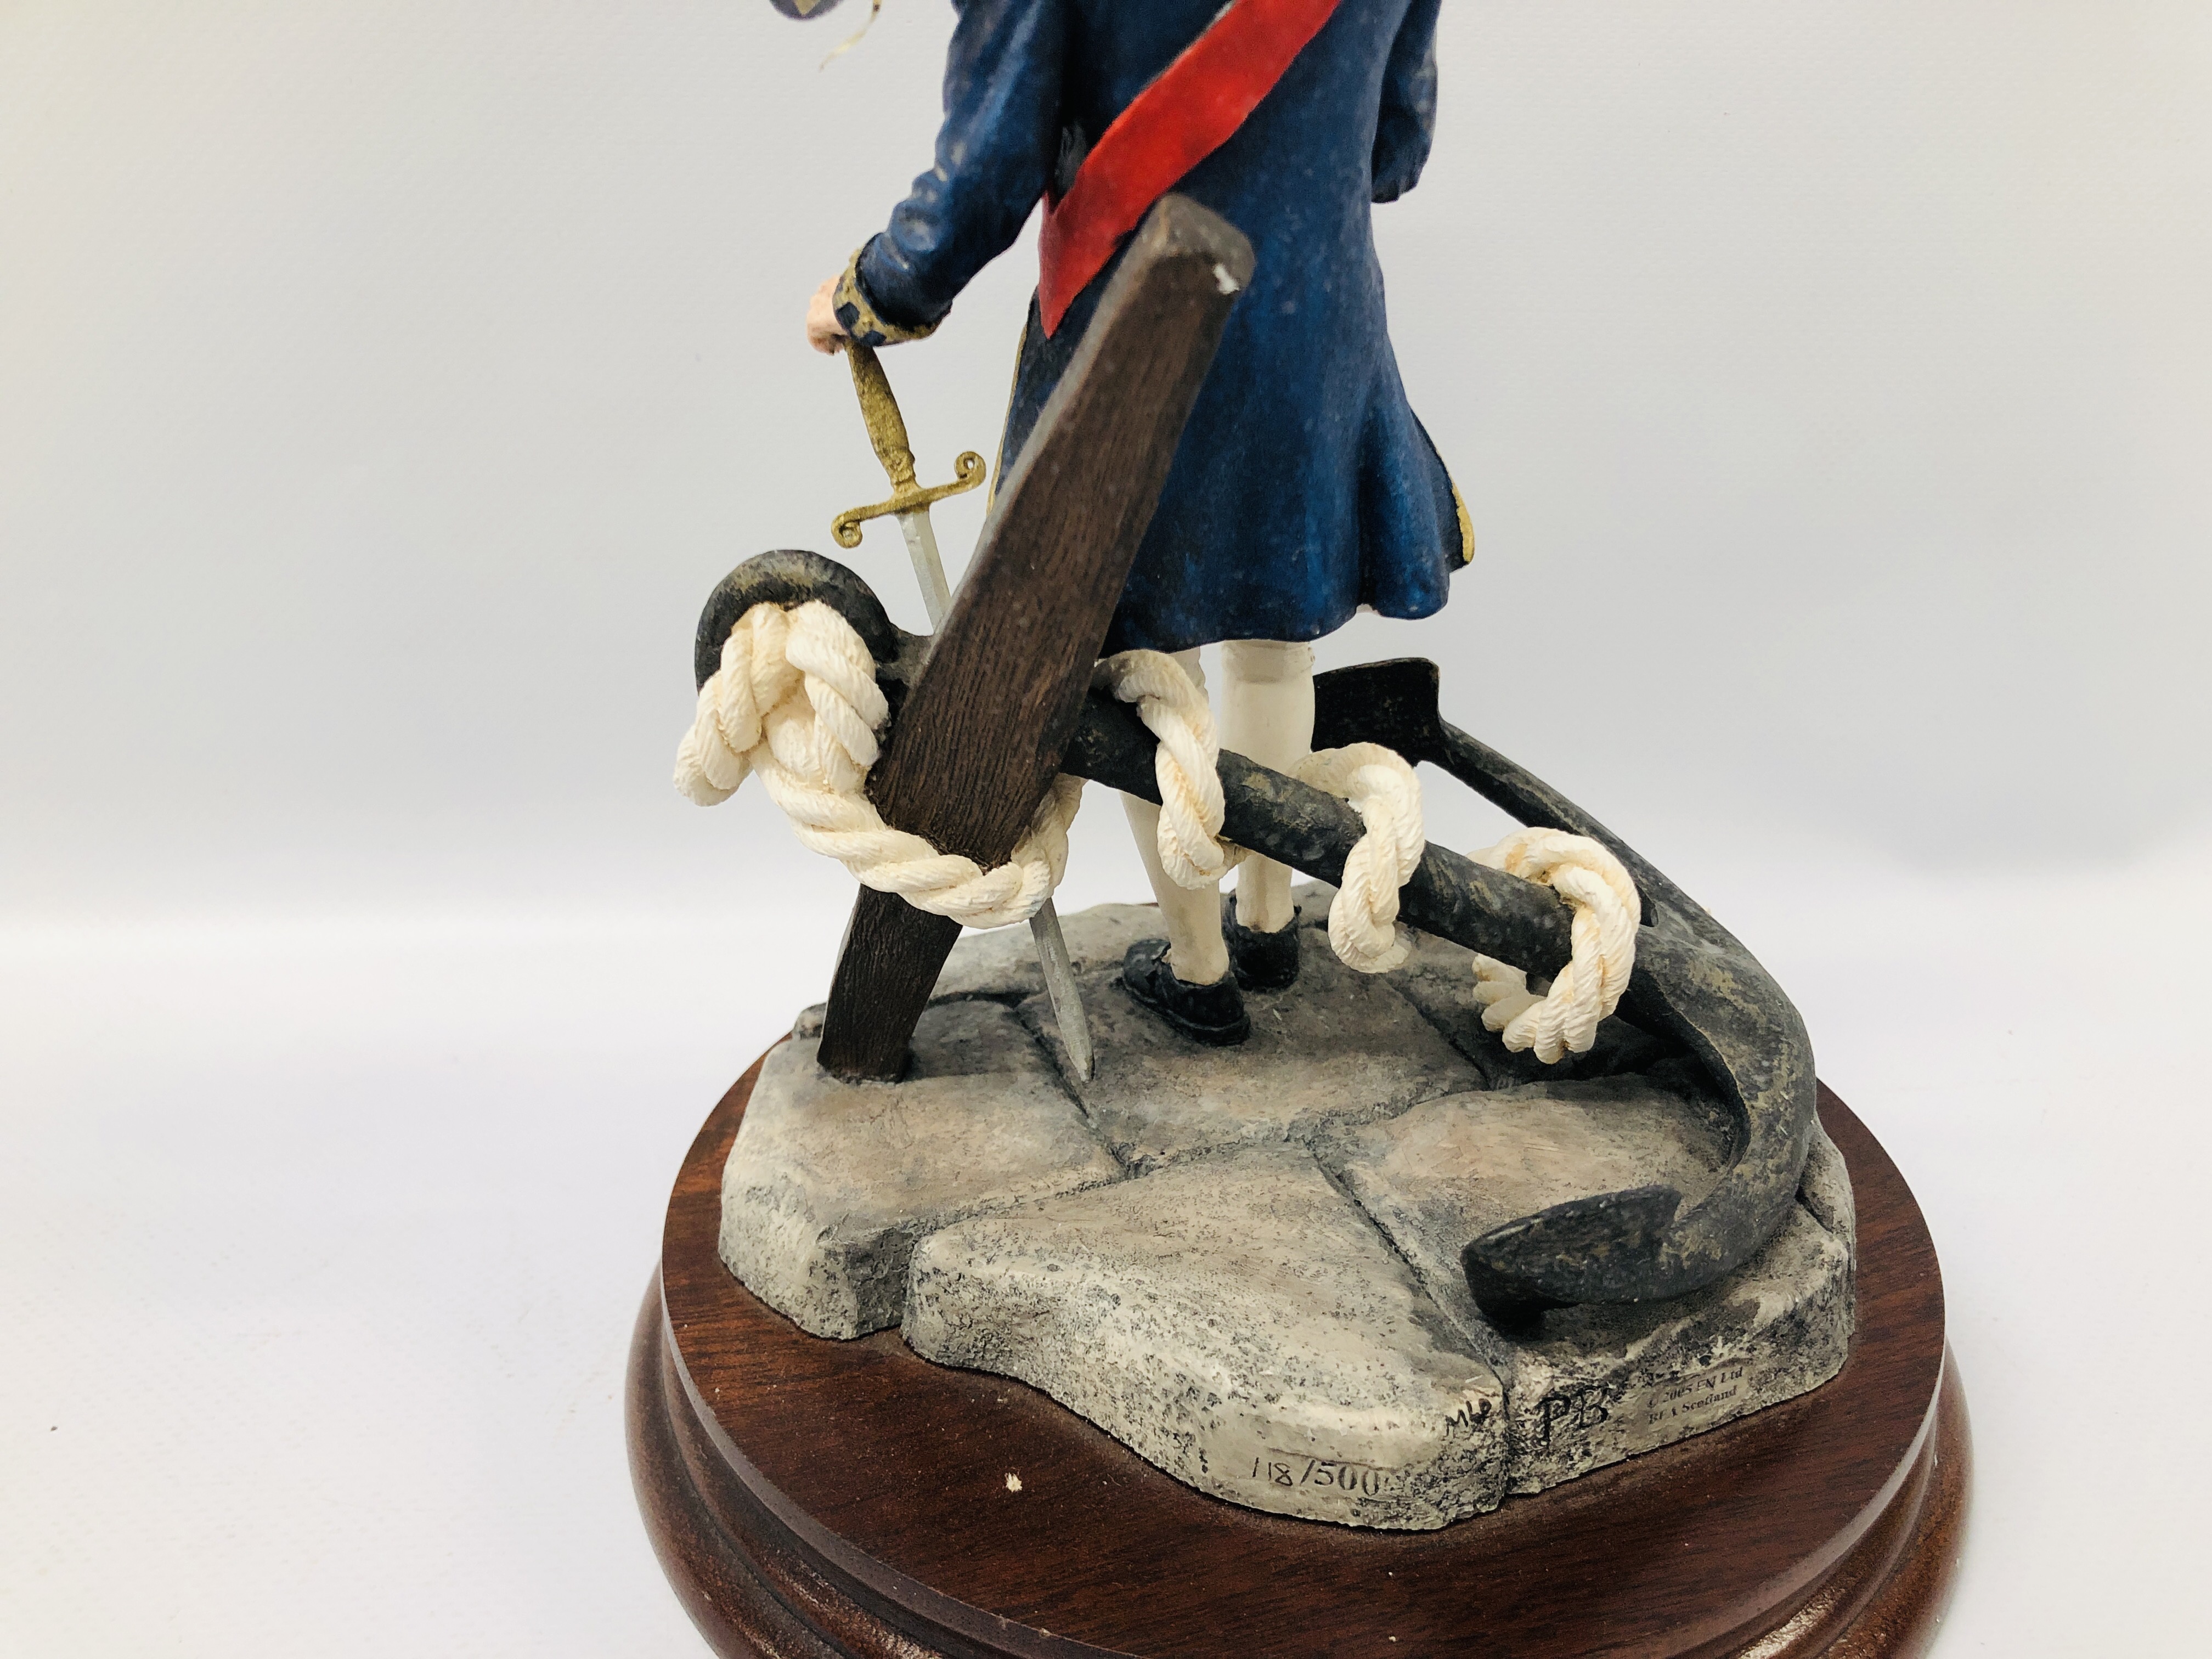 BORDER FINE ARTS LIMITED EDITION SCULPTURE 118 / 500 "ADMIRAL LORD NELSON" ALONG WITH ORIGINAL BOX - Image 6 of 12